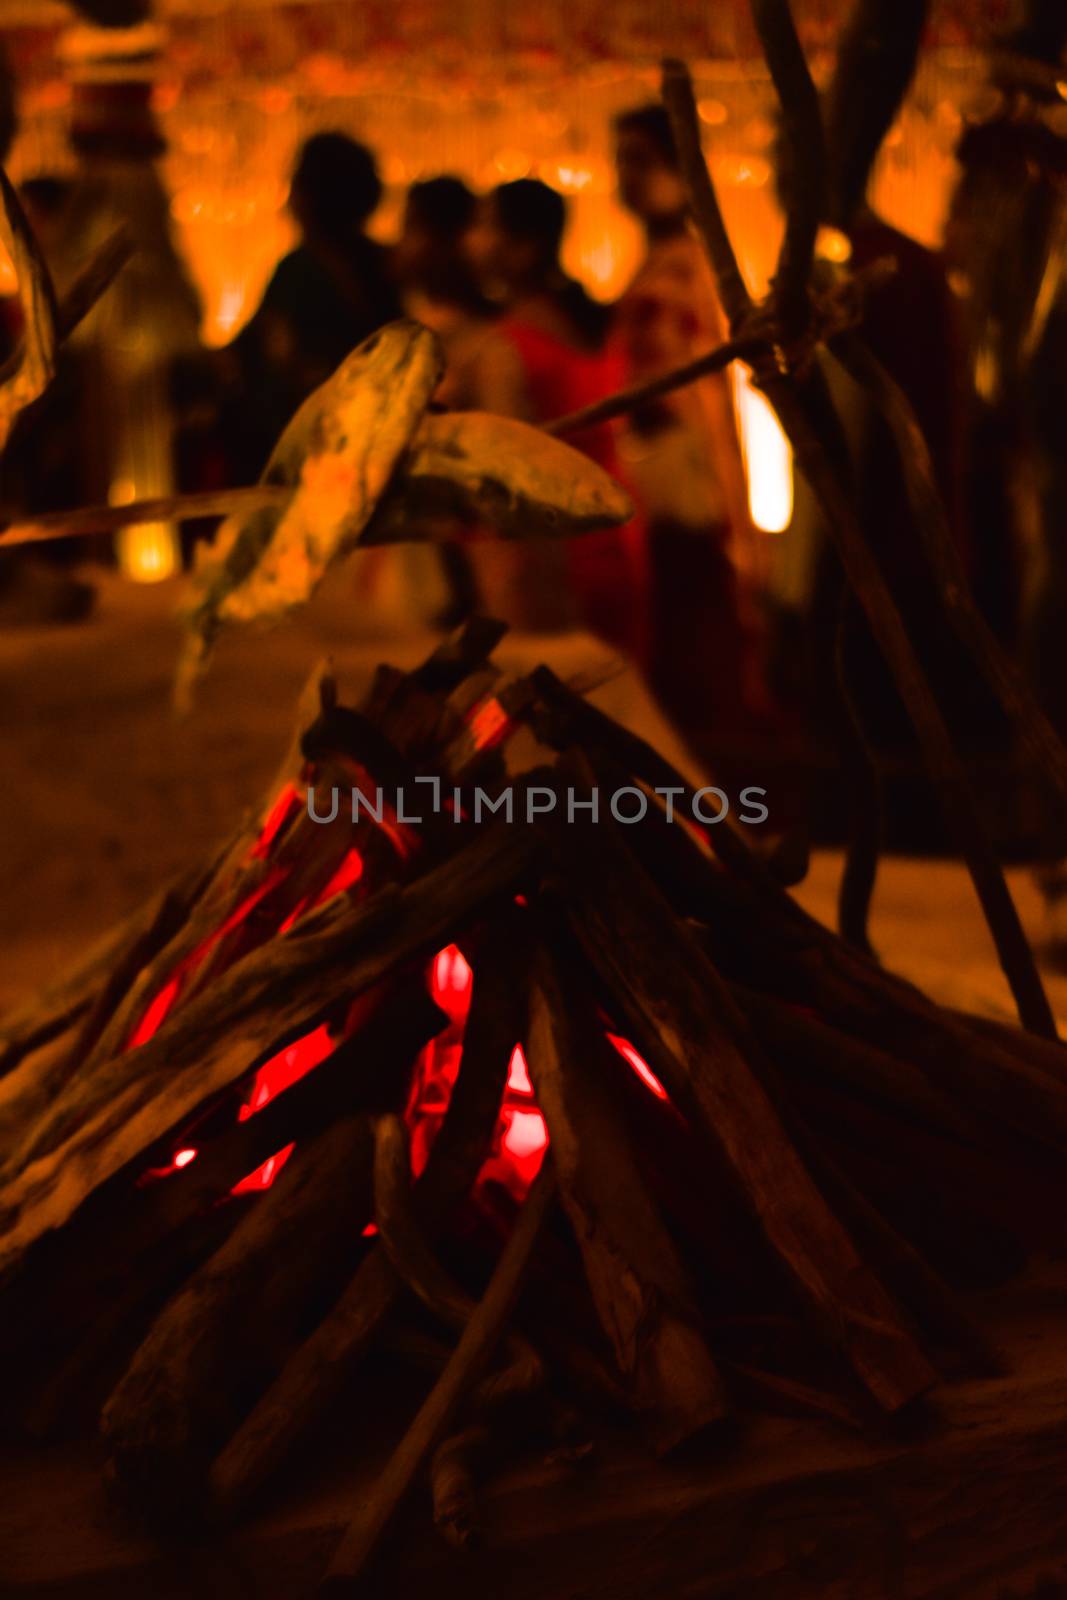 KOLKATA , INDIA SEPTEMBER 26, 2017 - Decorated art and craft decoration of artificial fireplace with flames made of wood timer and charcoal showing ancient life style in a famous Durga Puja pandal.